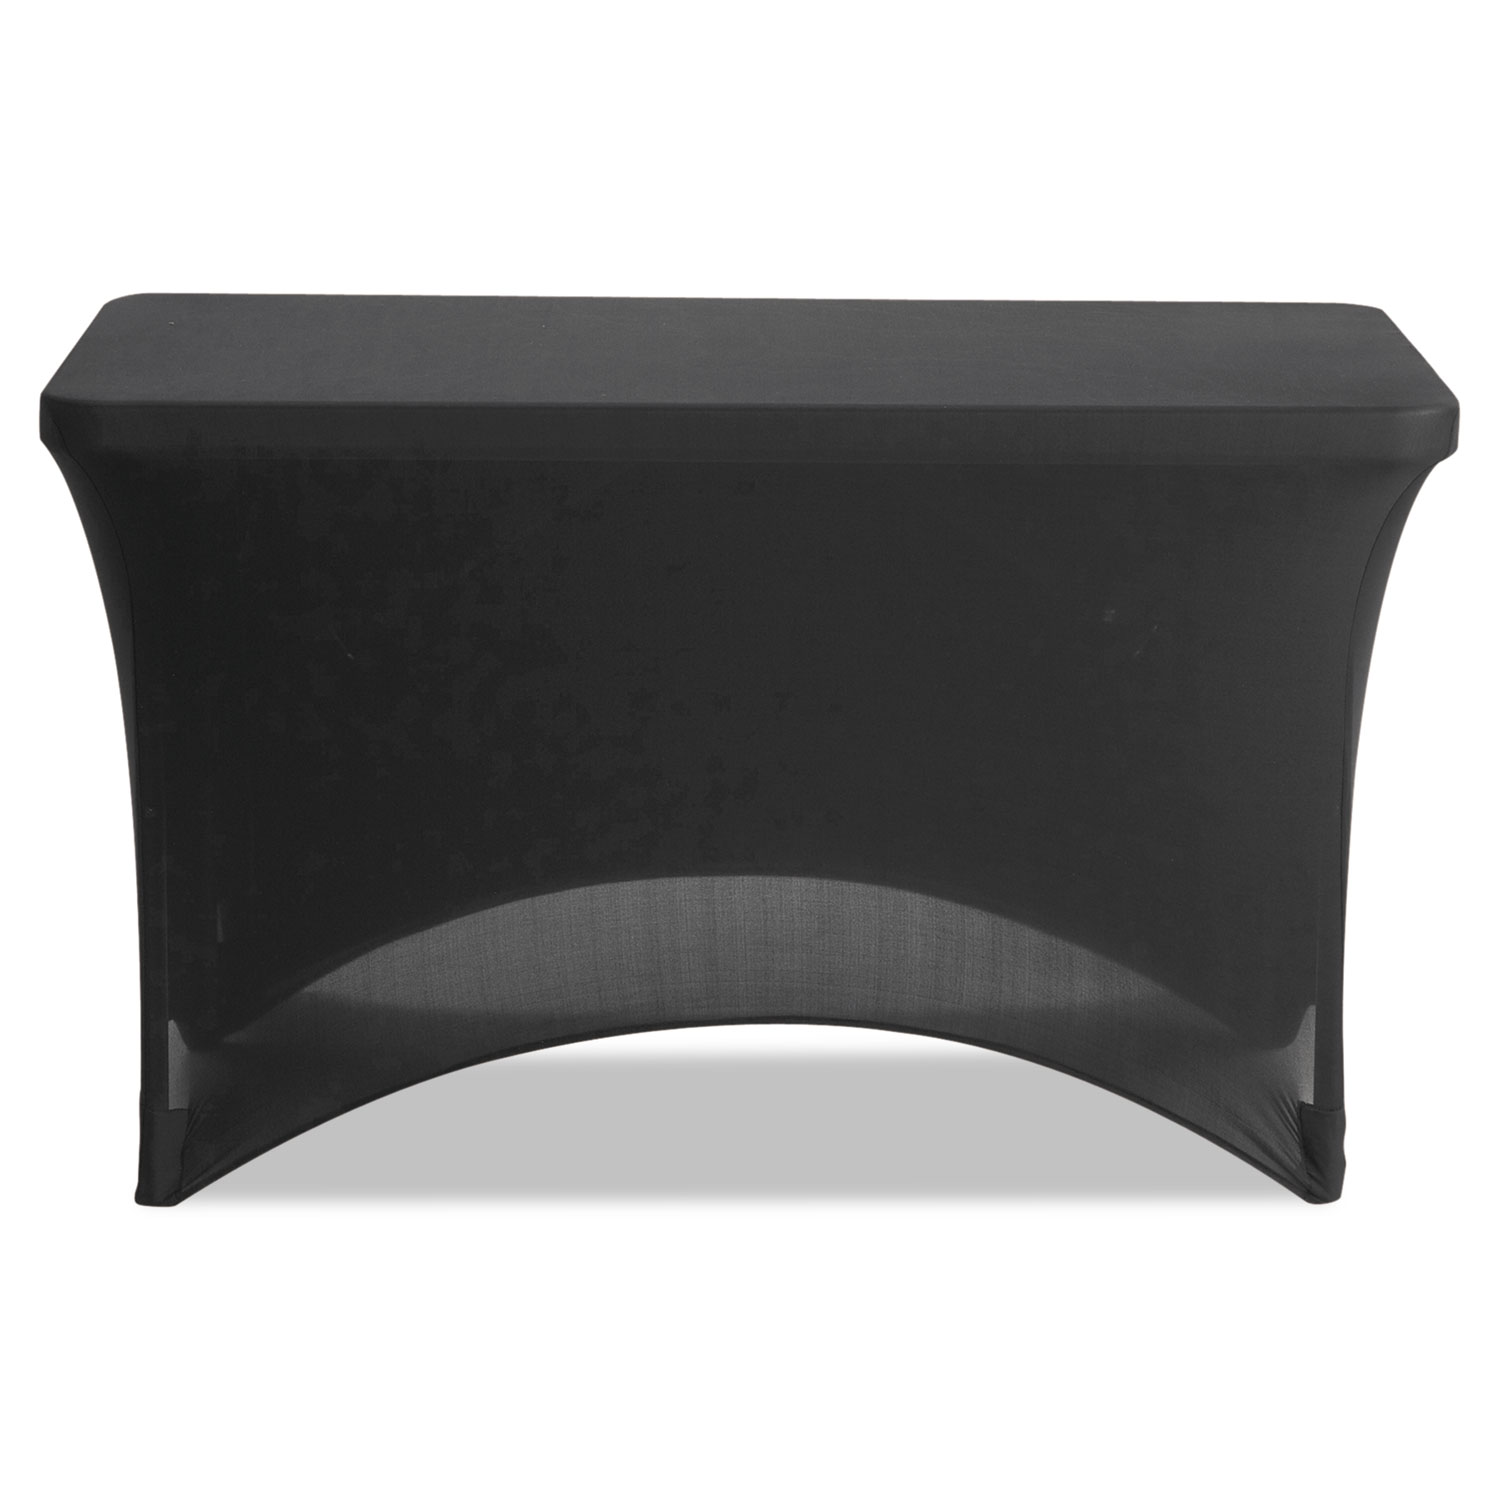 Stretch Fabric Table Cover Polyester Spandex 24 X 48 Black